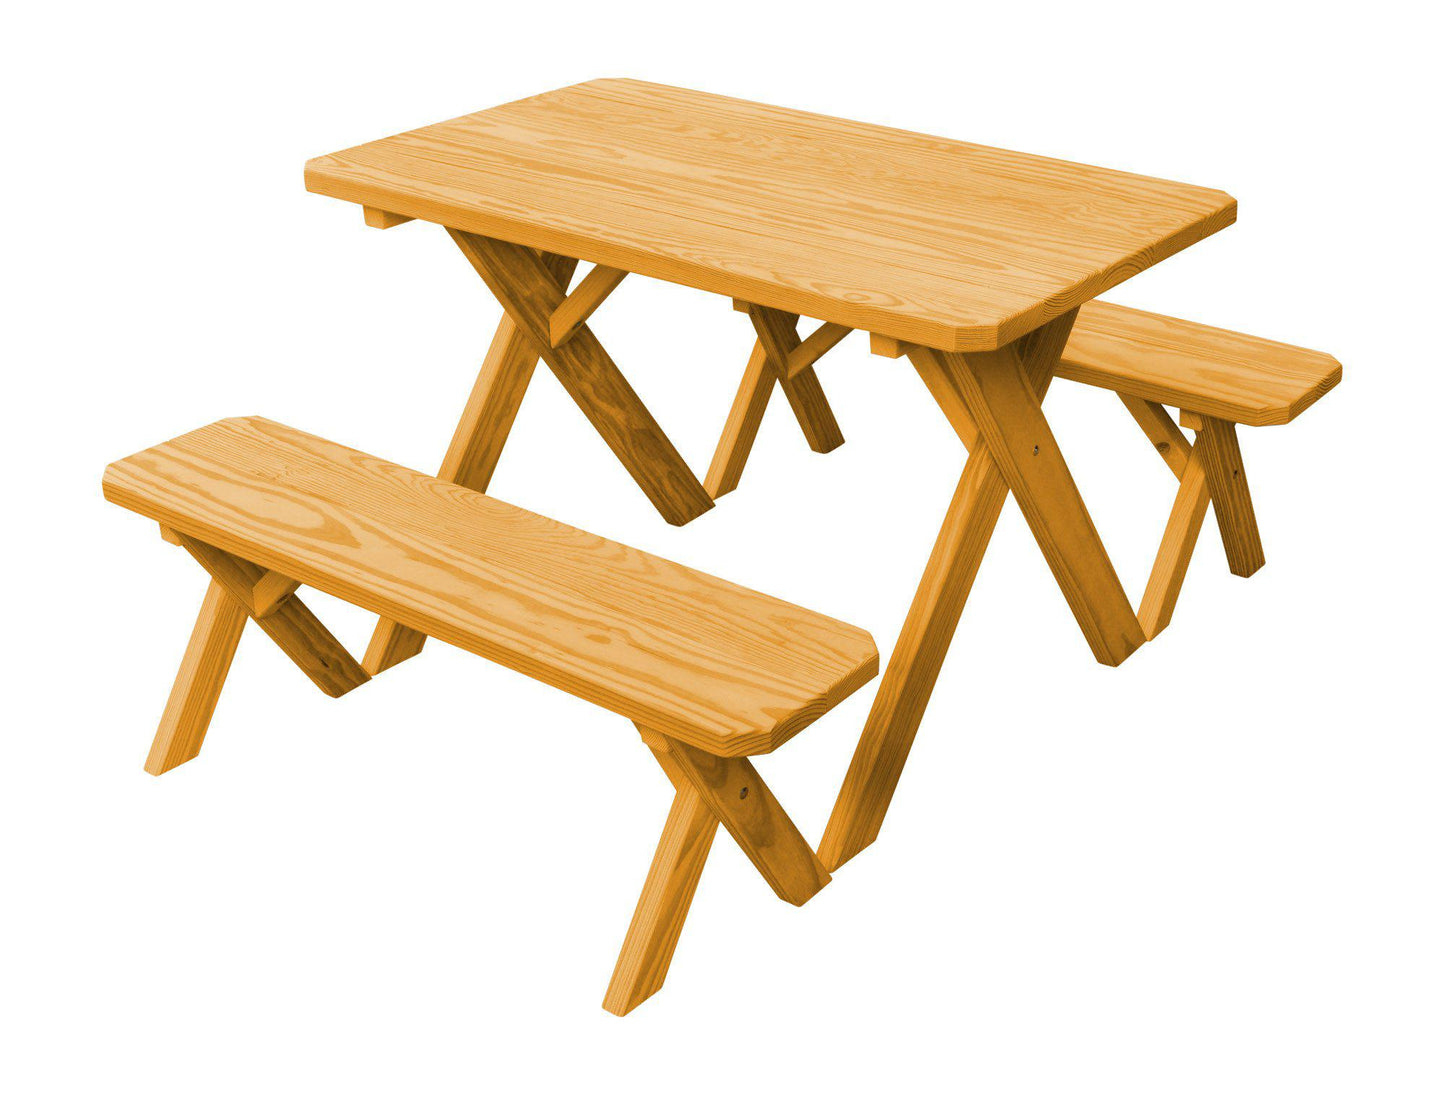 A&L Furniture Co. Pressure Treated Pine 5' Cross-leg Table w/2 Benches - LEAD TIME TO SHIP 10 BUSINESS DAYS